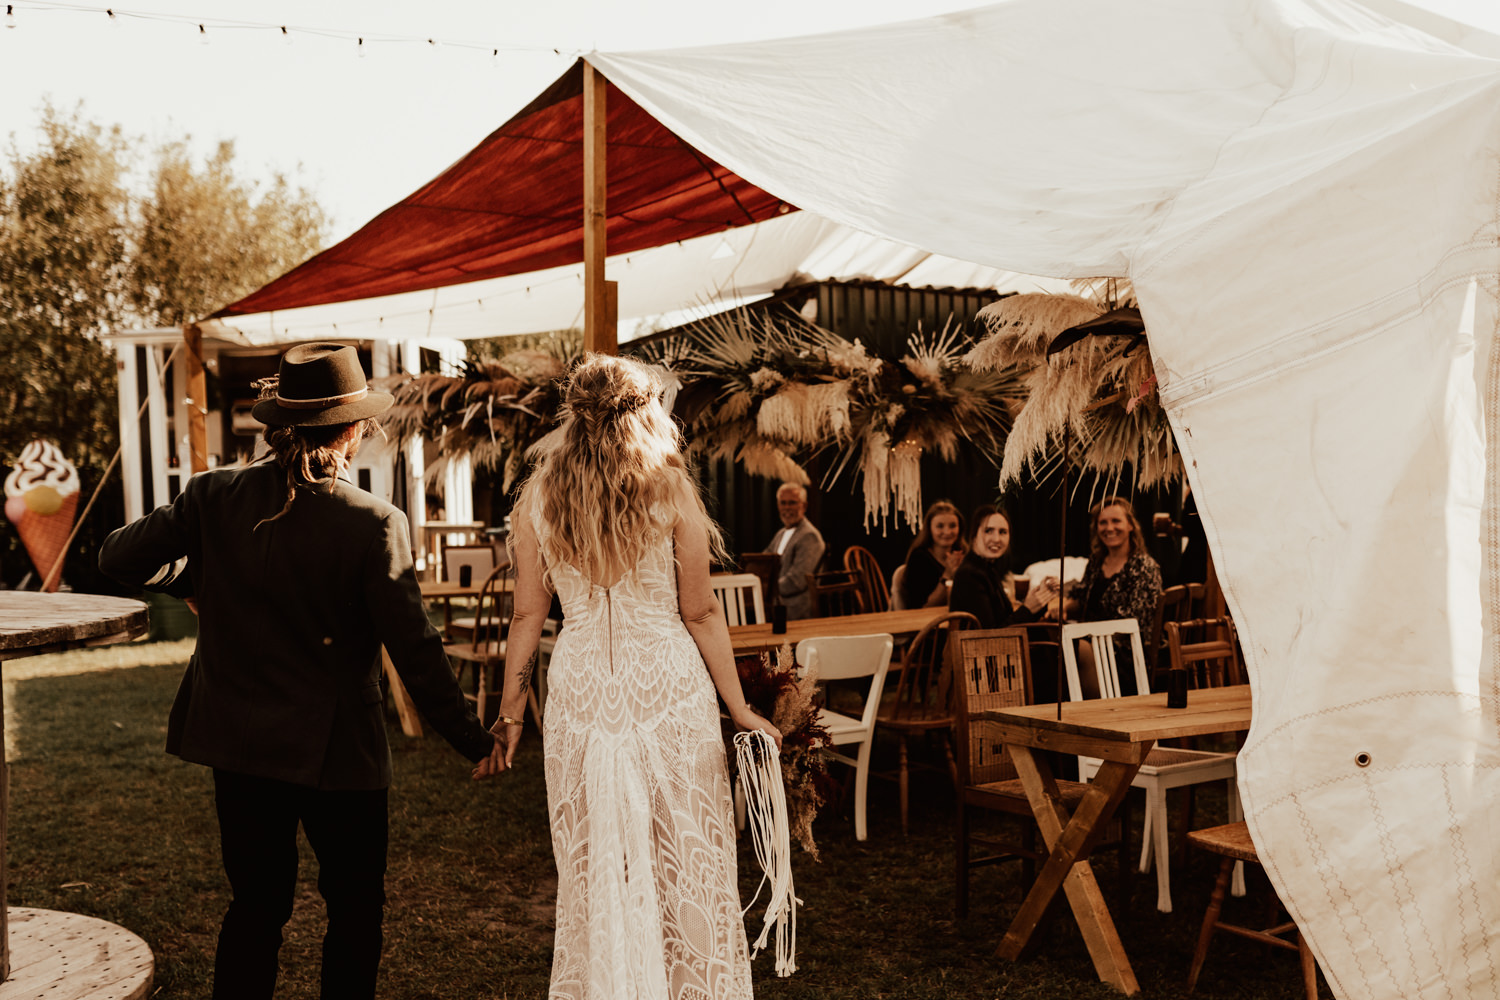 Wedding couple walks in to wedding venue at their outdoor festival wedding with sail stretch tent and hanging flower arrangements